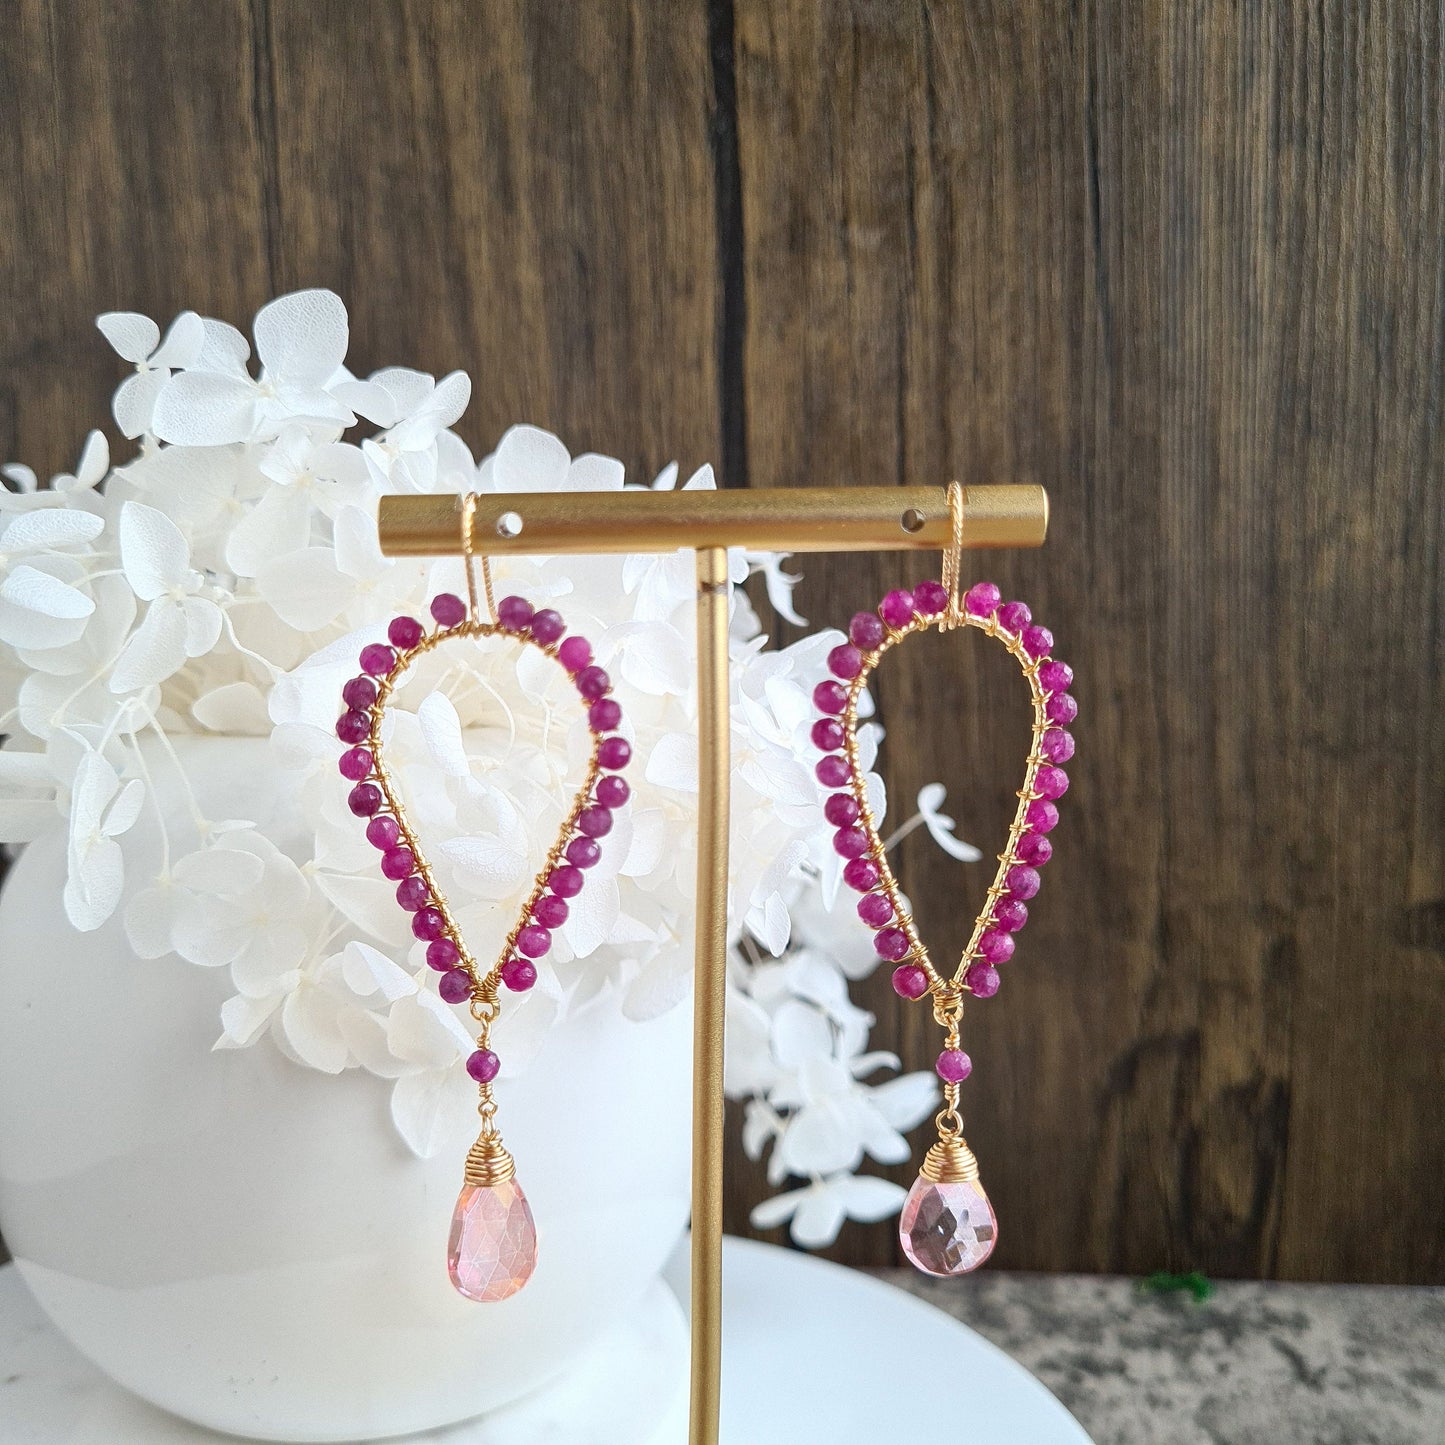 Inverted Tear Drop Gemstone Earrings - Pink Mystic Coated Quartz with Ruby